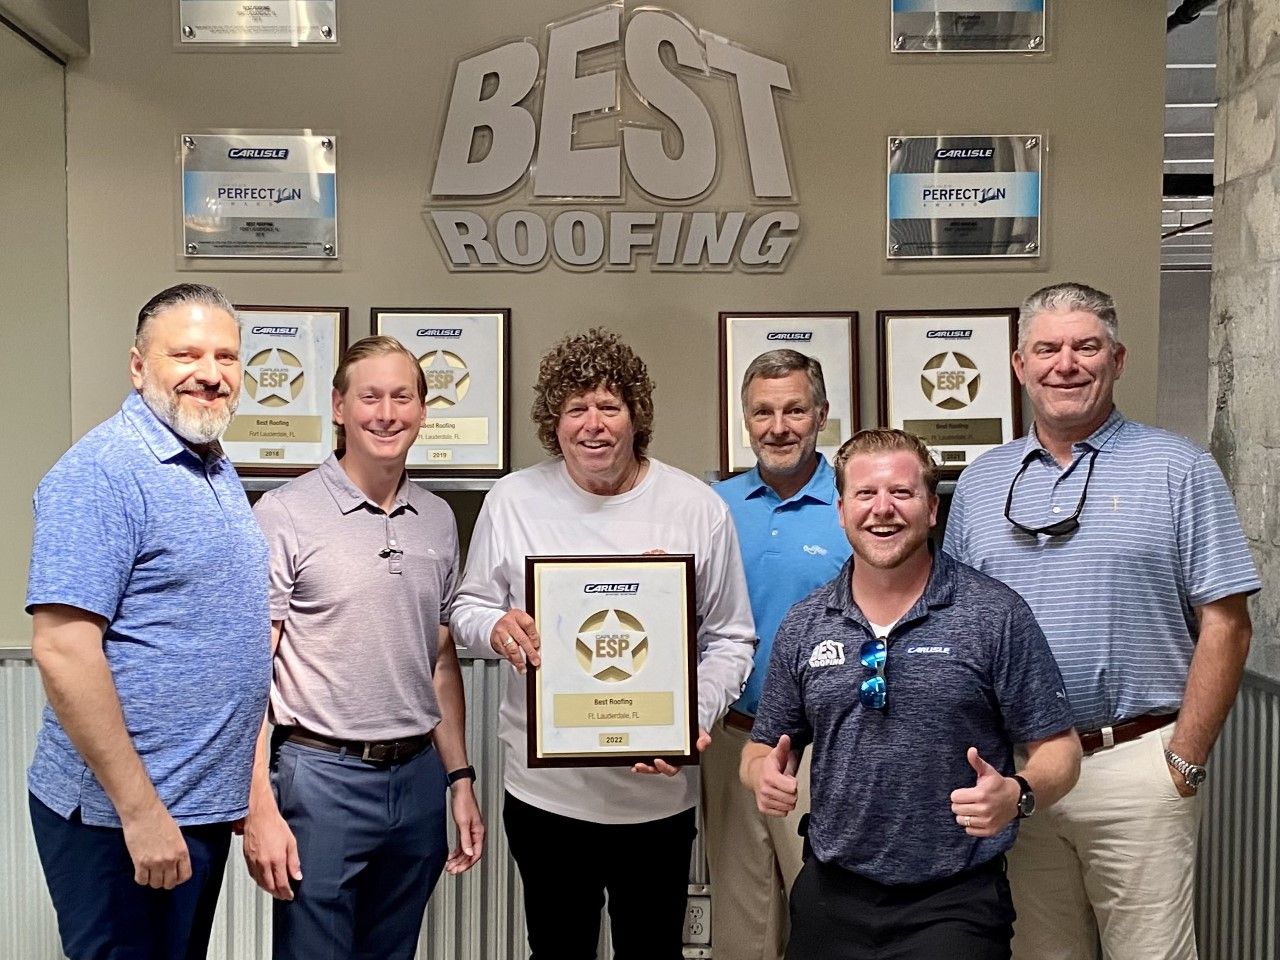 Best Roofing receives 2022 Carlisle Roofing Excellence award